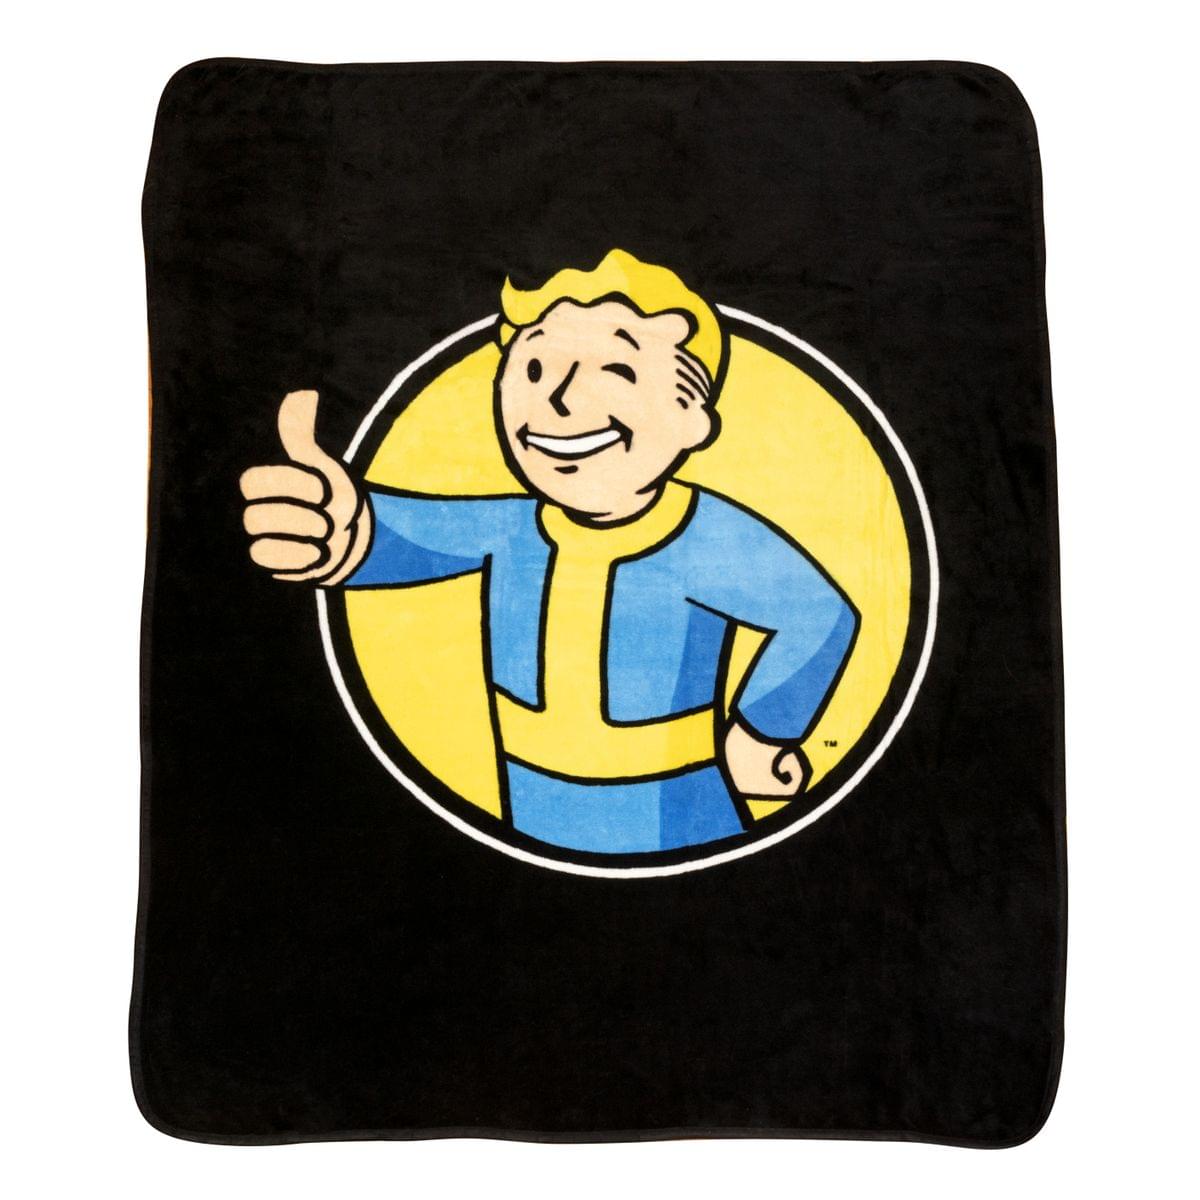 Fallout Fan Bundle Set With Playing Cards, Bottle Opener, Cookie Jar And More